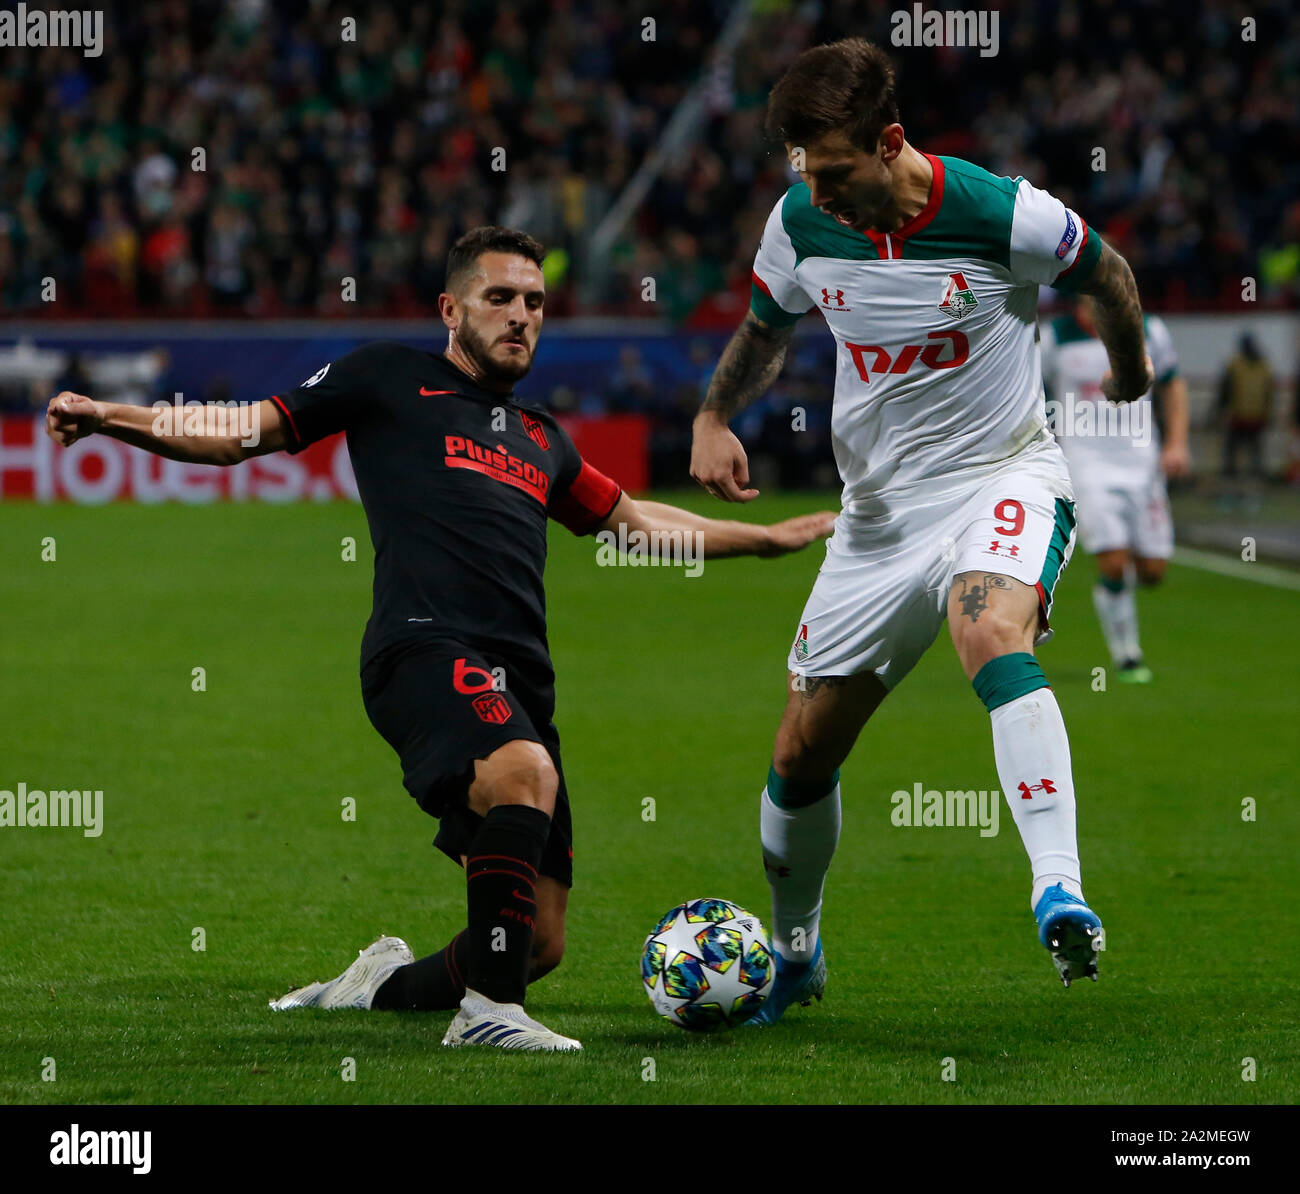 MOSCOW, RUSSIA - OCTOBER 01: Fyodor Smolov (R) of Lokomotiv Moskva and Koke of Atletico Madrid vie for the ball during the UEFA Champions League group D match between Lokomotiv Moskva and Atletico Madrid at RZD Arena on October 1, 2019 in Moscow, Russia. (Photo by MB Media) Stock Photo